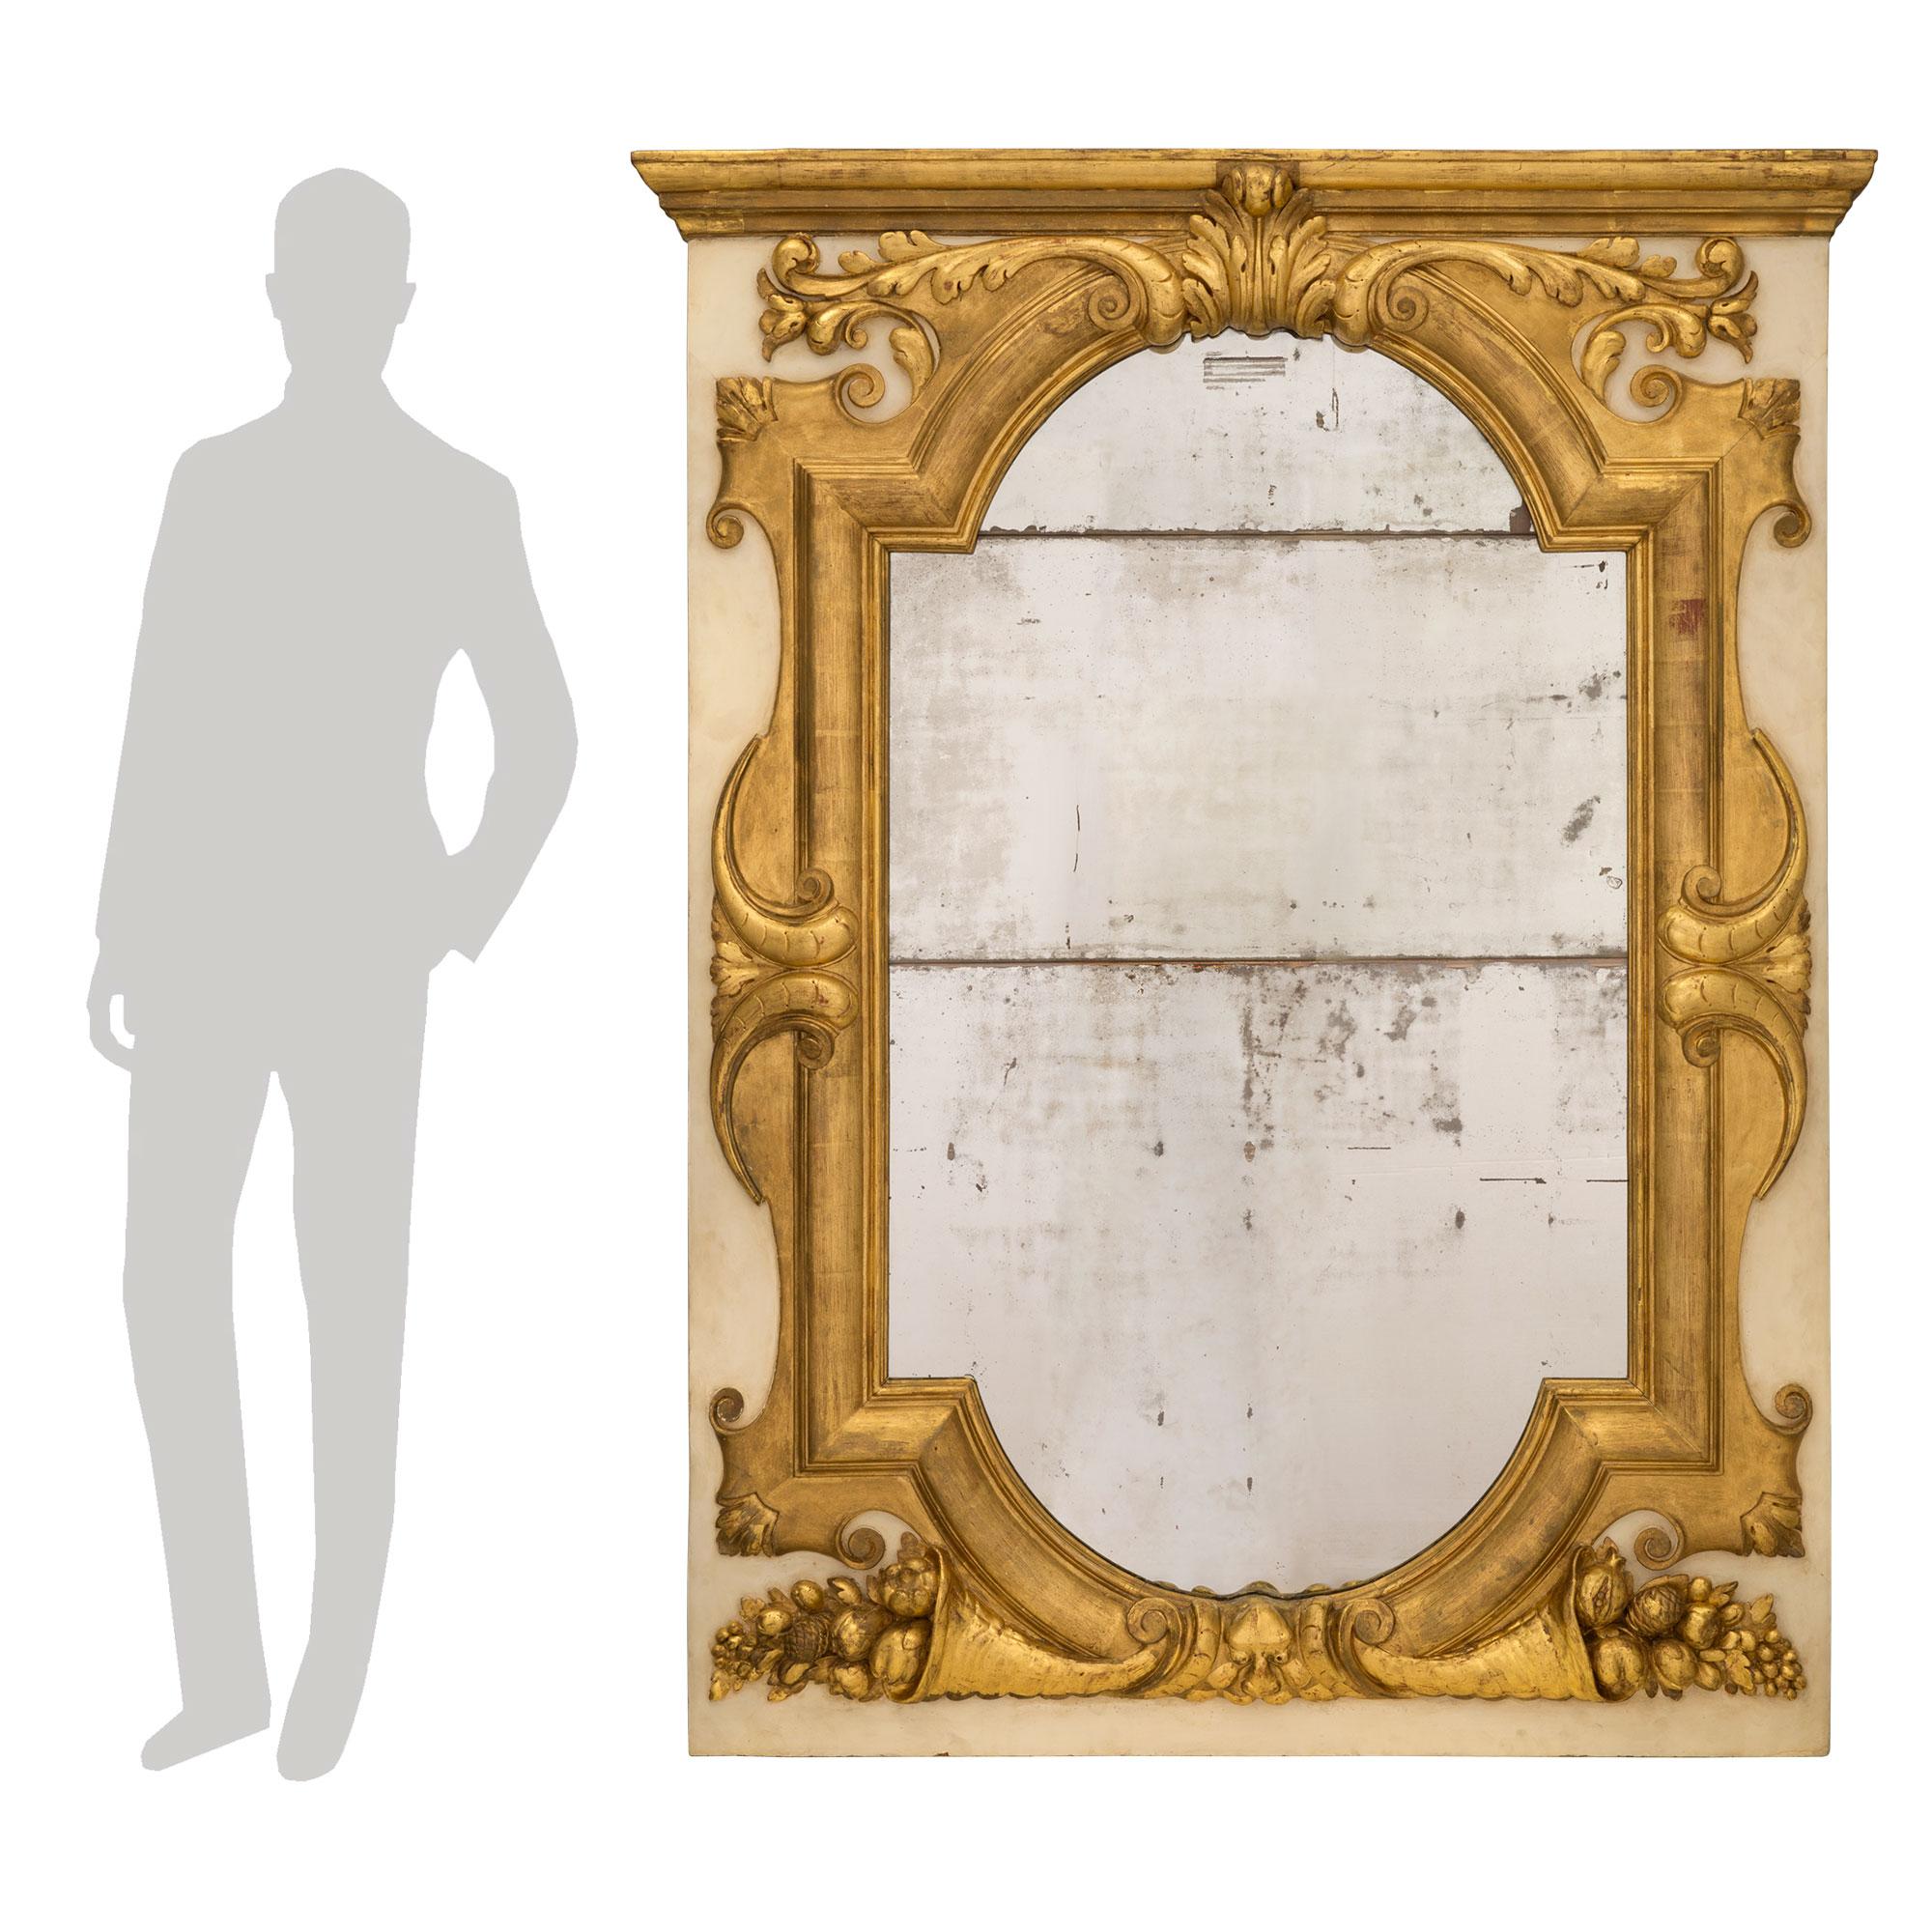 A powerful Italian 19th century giltwood and patinated off white mirror. The original mirror plate is set within an impressive and most decorative mottled giltwood border set on a patinated off white background. At the base are richly carved